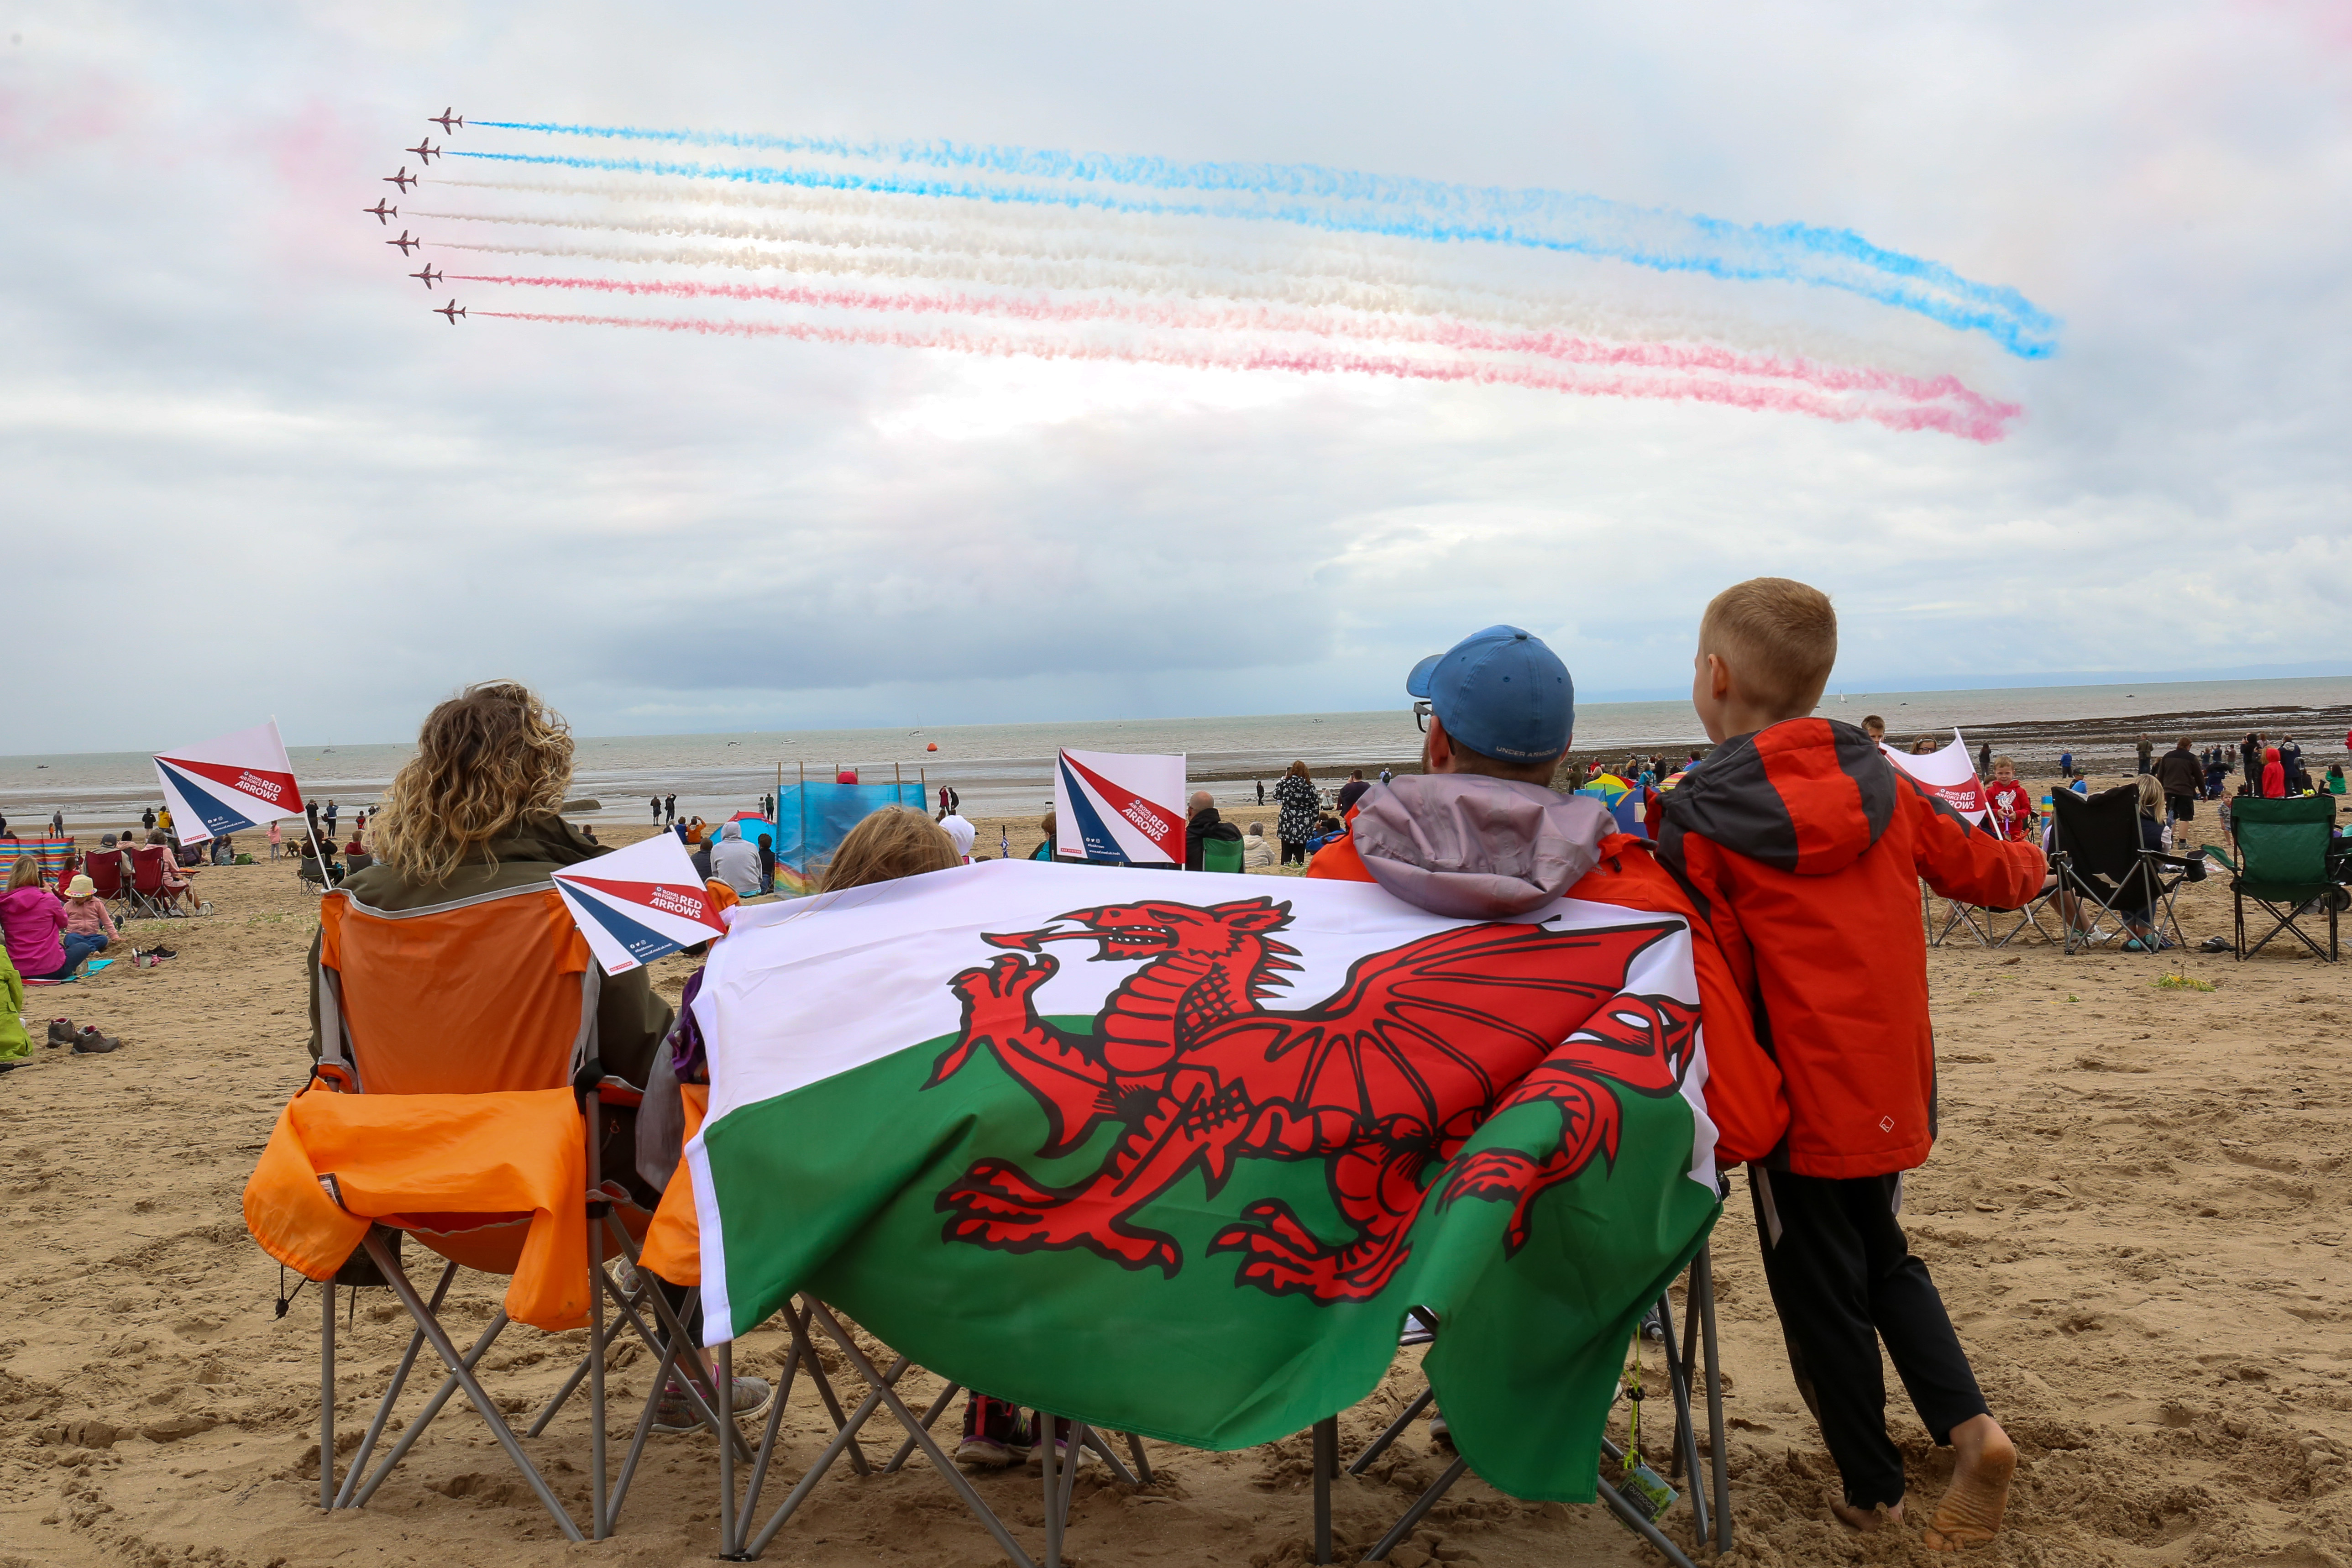 Image shows the Red Arrows perform with red, white and blue colour trails, over a beach. Family watch from deck chairs, with a Welsh flag.